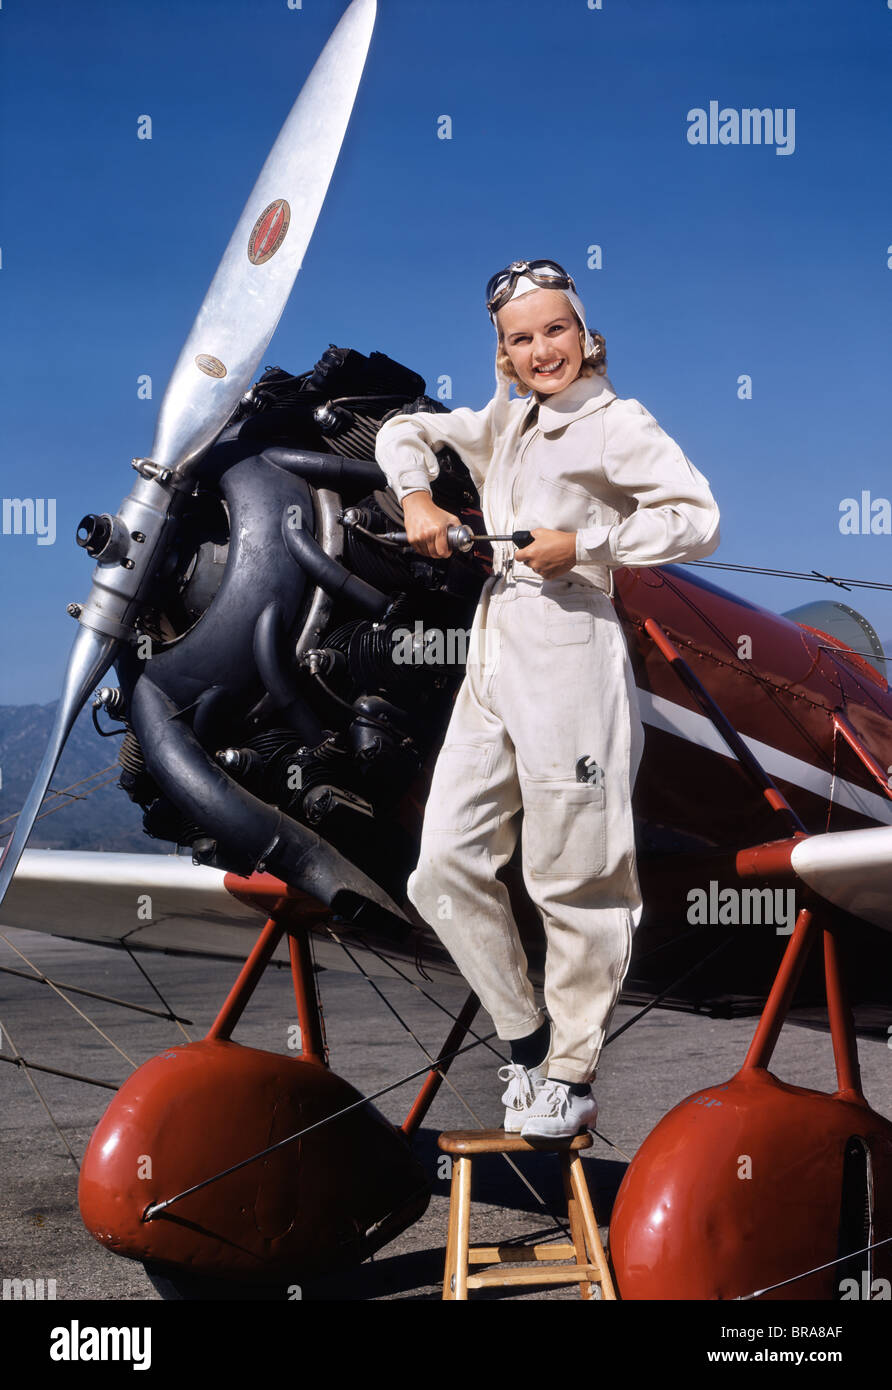 1930s 1940s SMILING WOMAN AIRPLANE PILOT MECHANIC IN COVERALLS STAND WORKING ON PROPELLER ENGINE LOOKING AT CAMERA Stock Photo